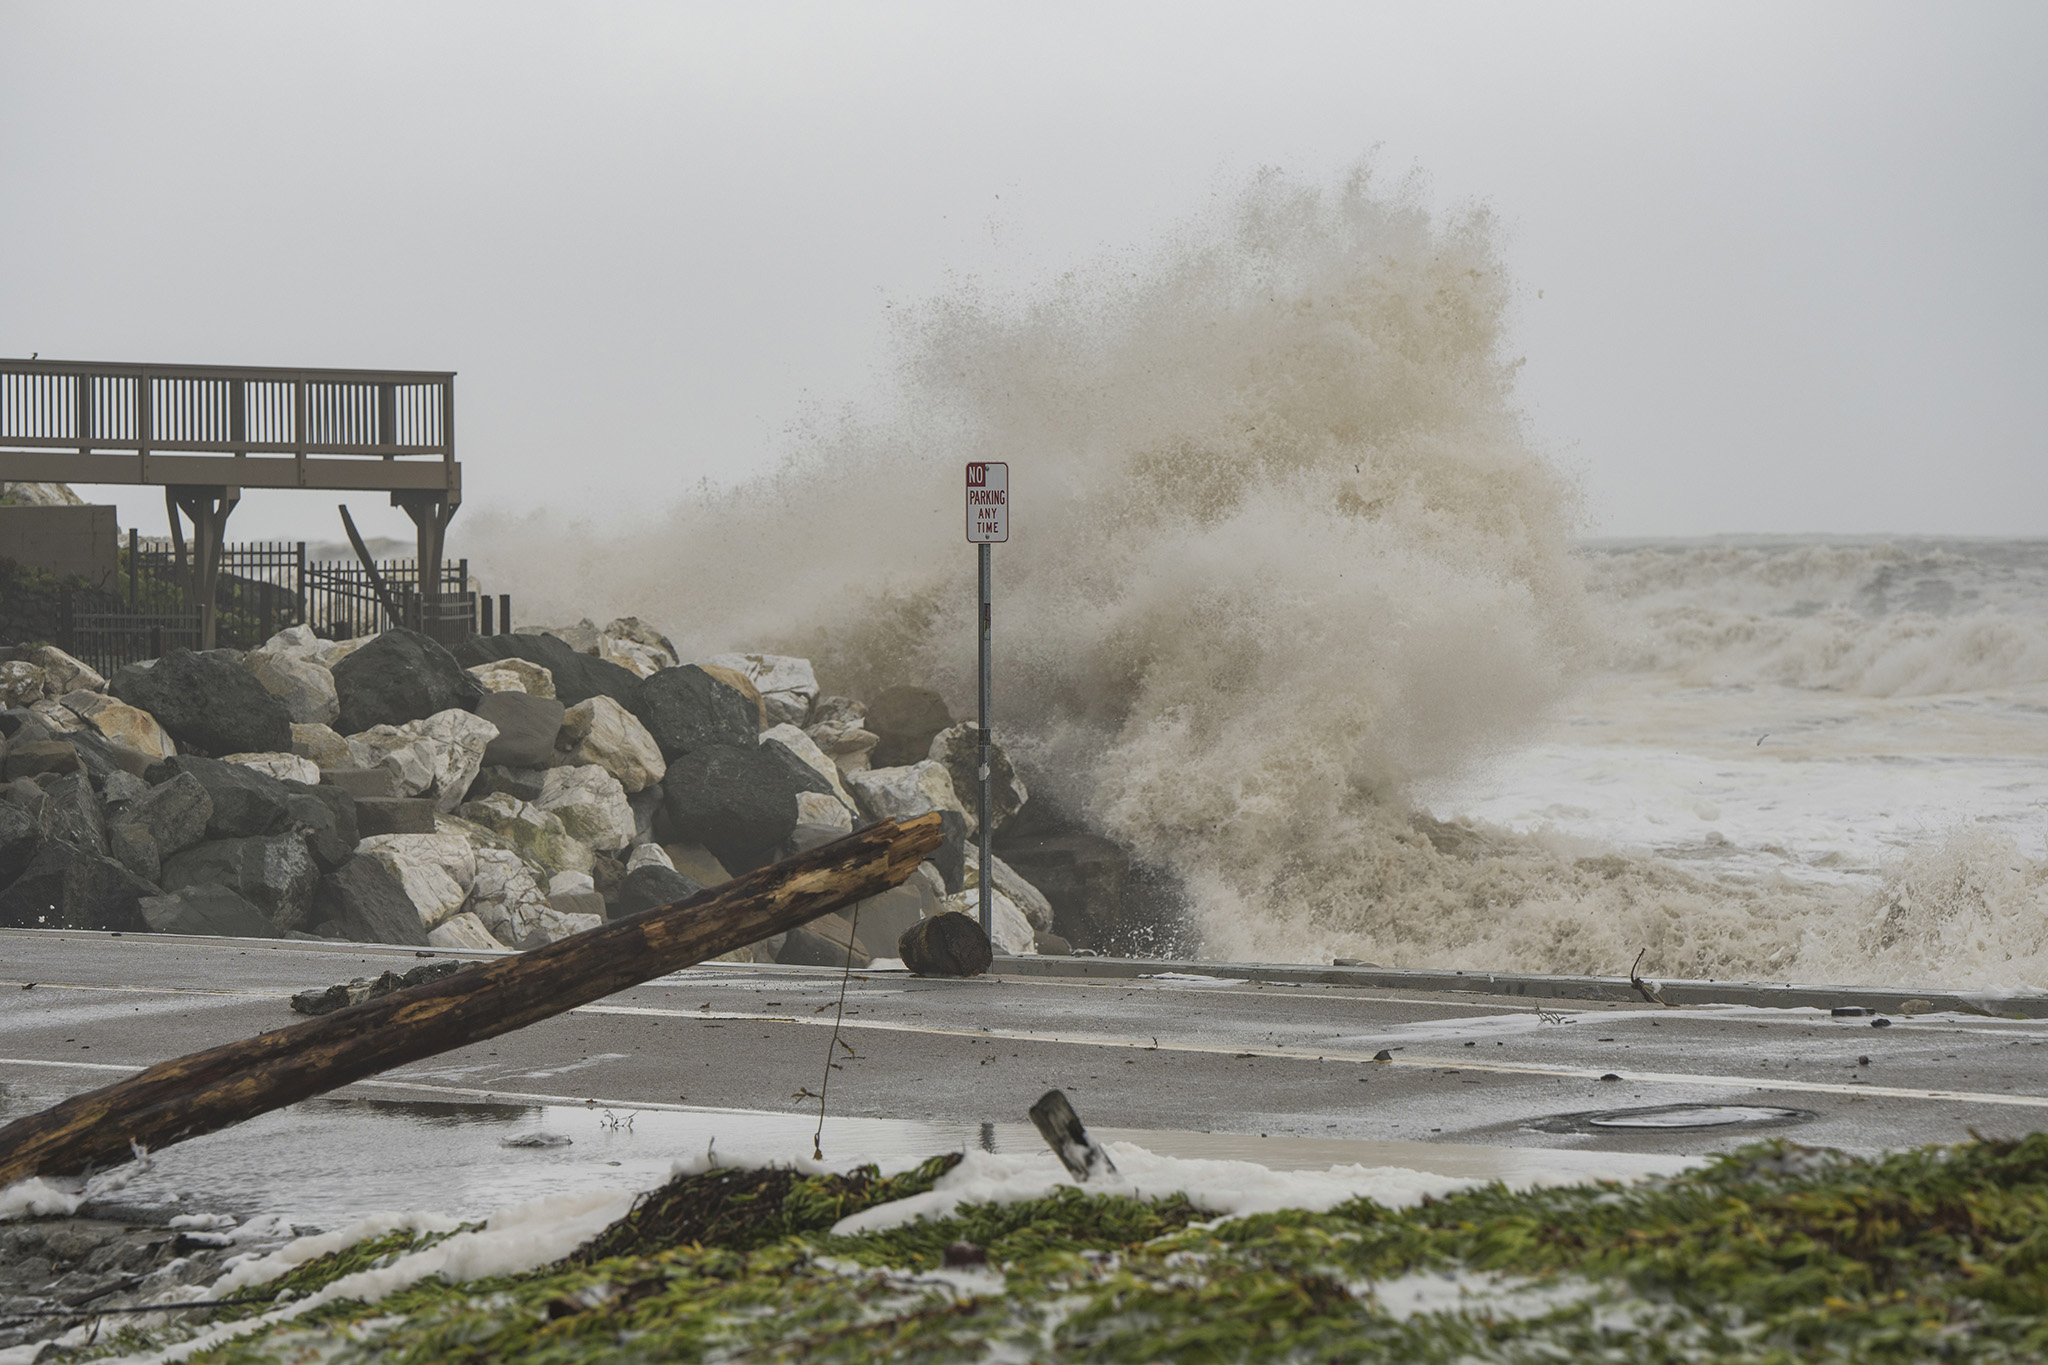 Calif. storm whips up 50foot waves, flooding Bay Area towns